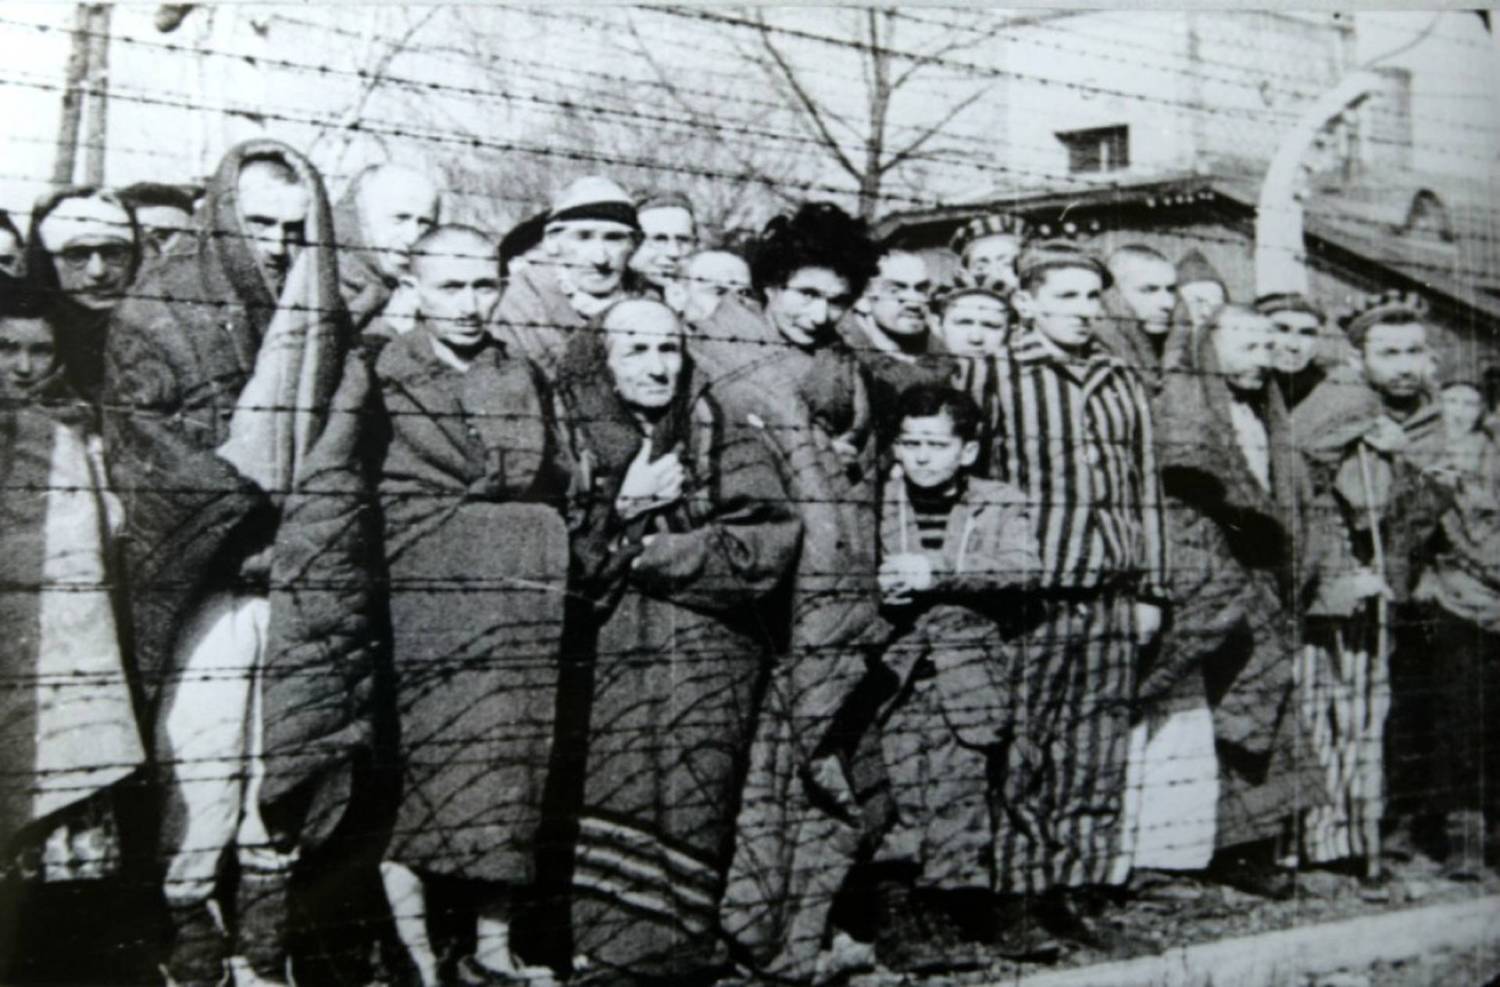 Holocaust Photos: 20 Haunting Images Of The Horror Of Auschwitz, An Emblem Of Nazism